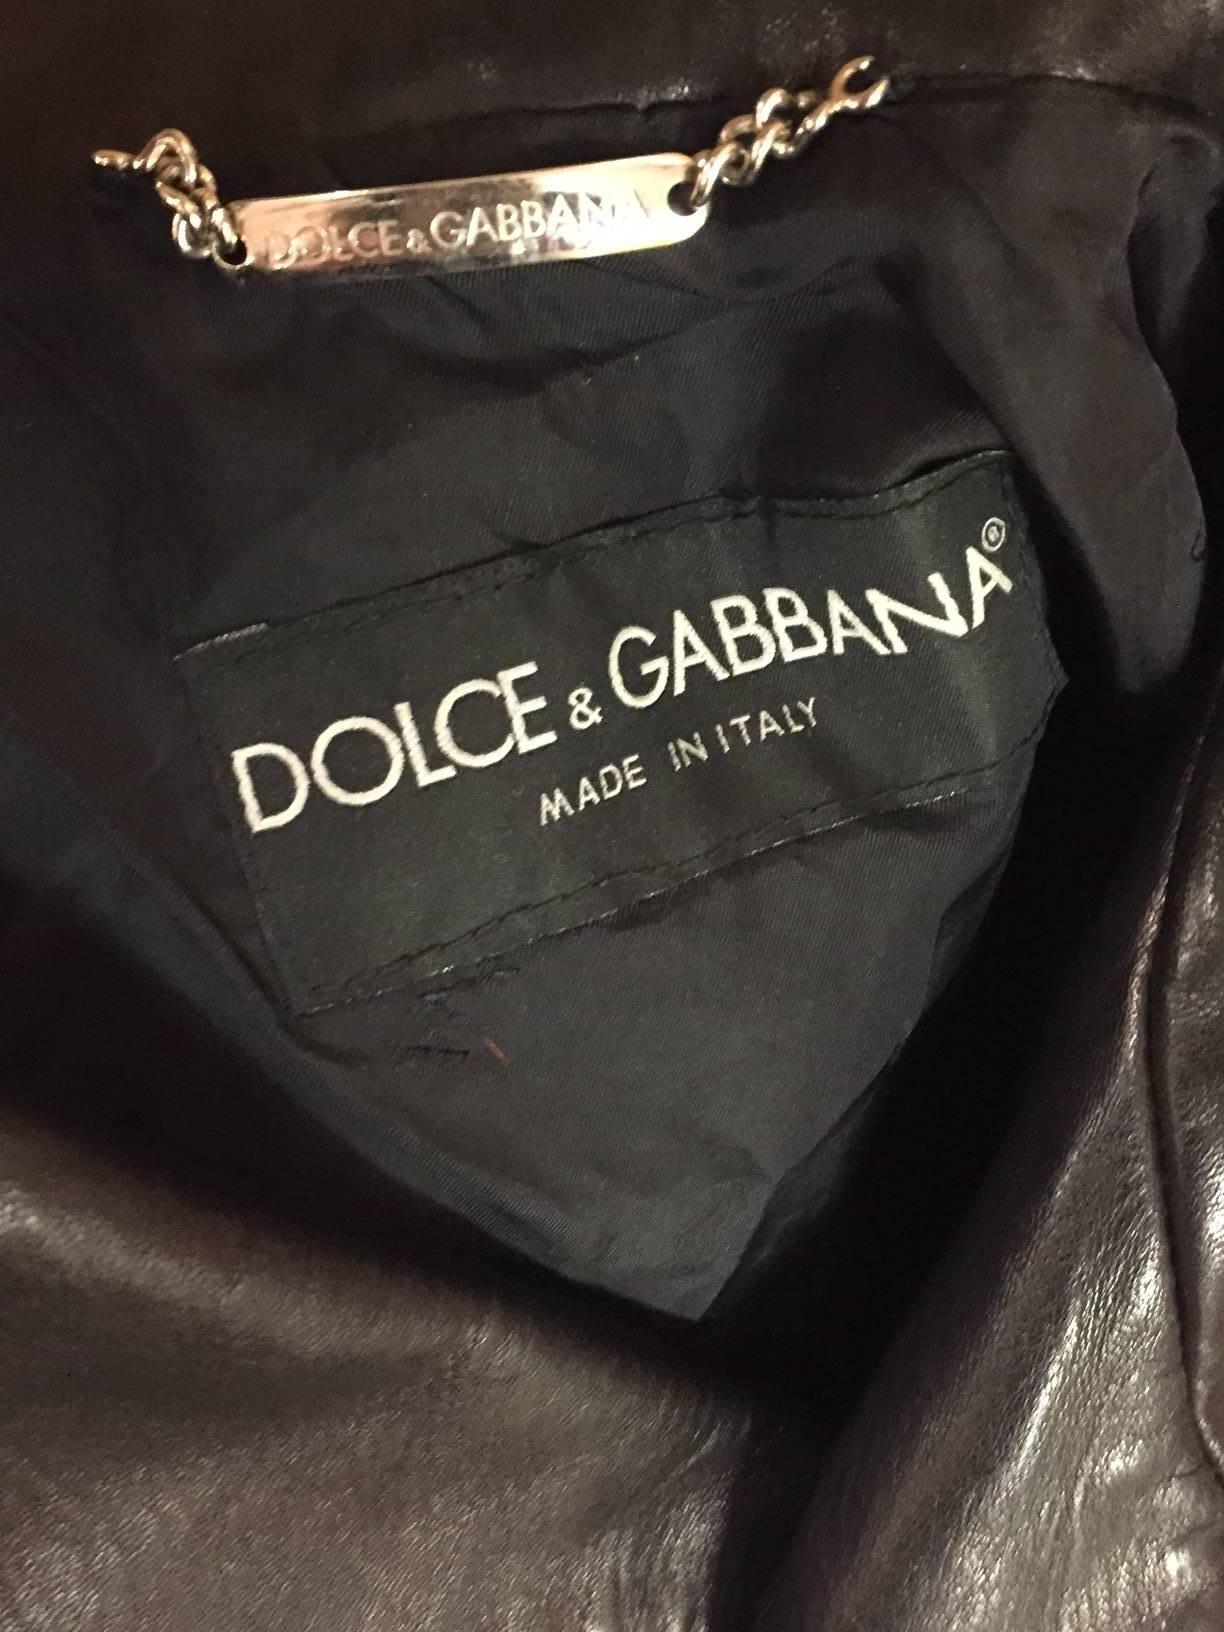 Dolce & Gabbana Red Goat Hide and Black Leather Motorcycle Jacket.  1